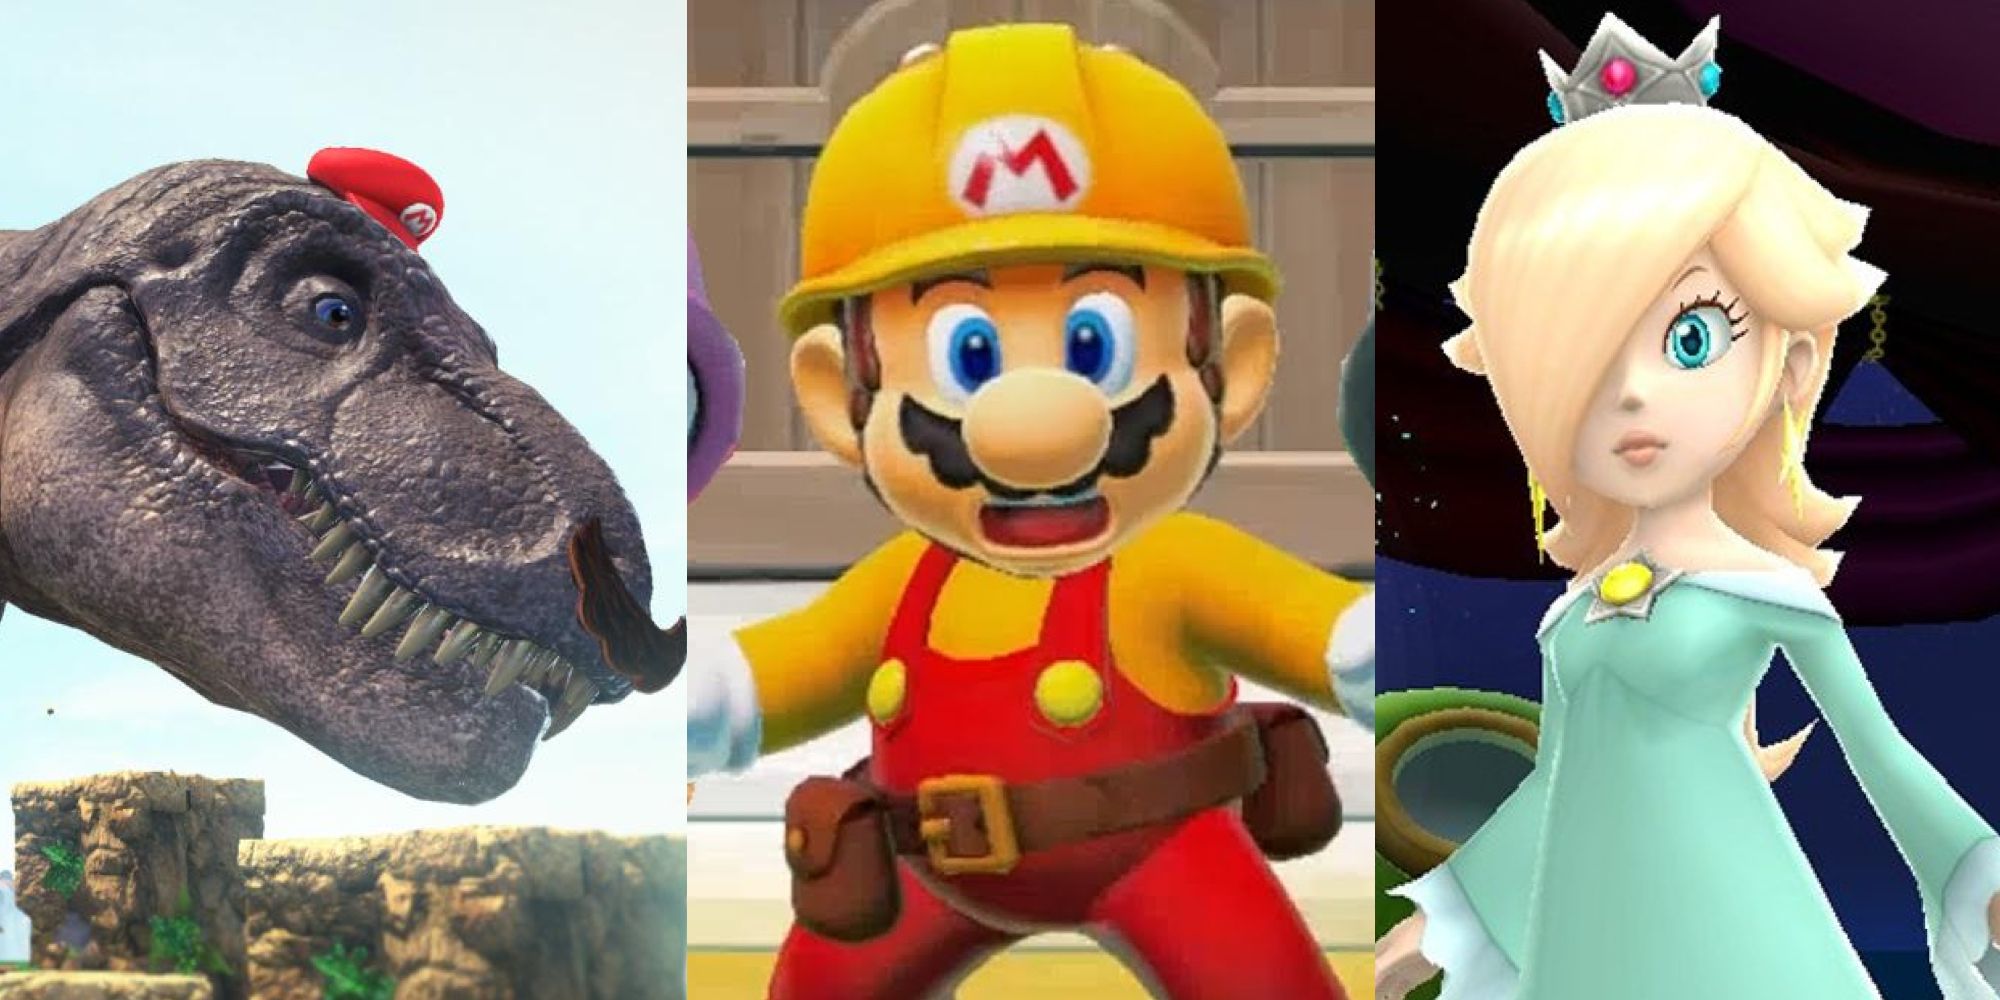 A T-Rex with Mario's hat and stache; shocked Mario in his construction outfit; Rosalina standing